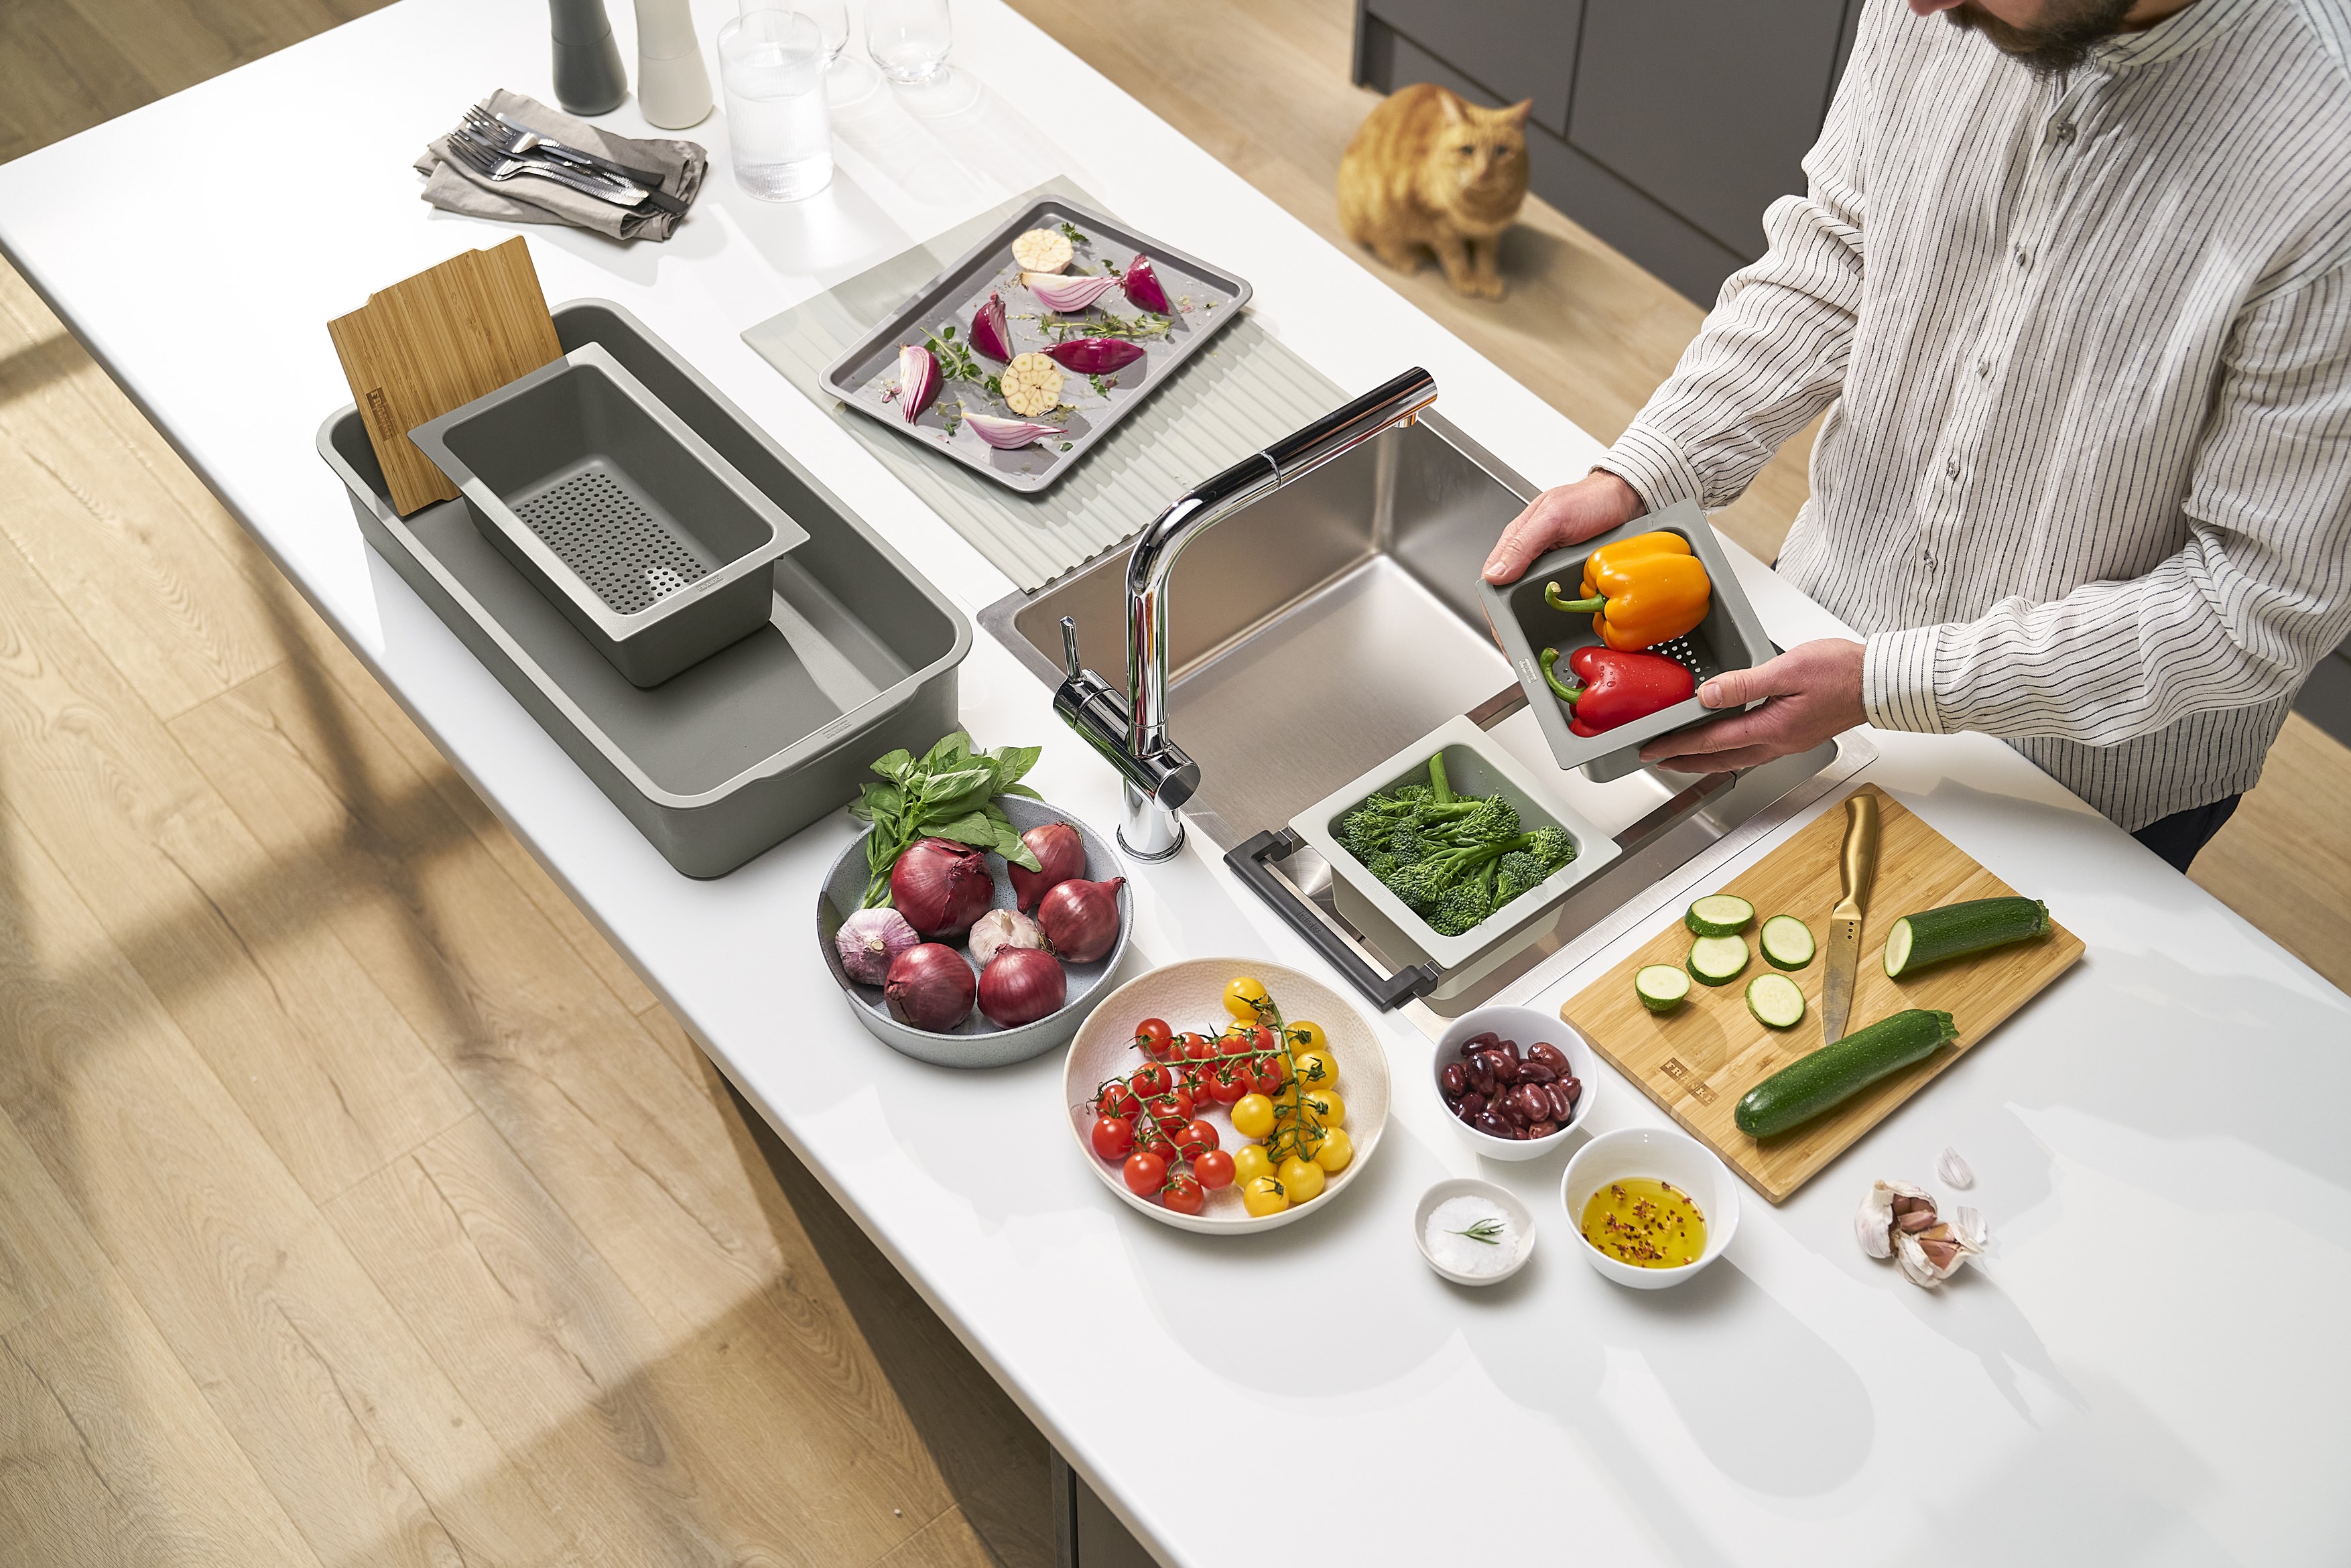 ALL-IN The flexible food preparation system